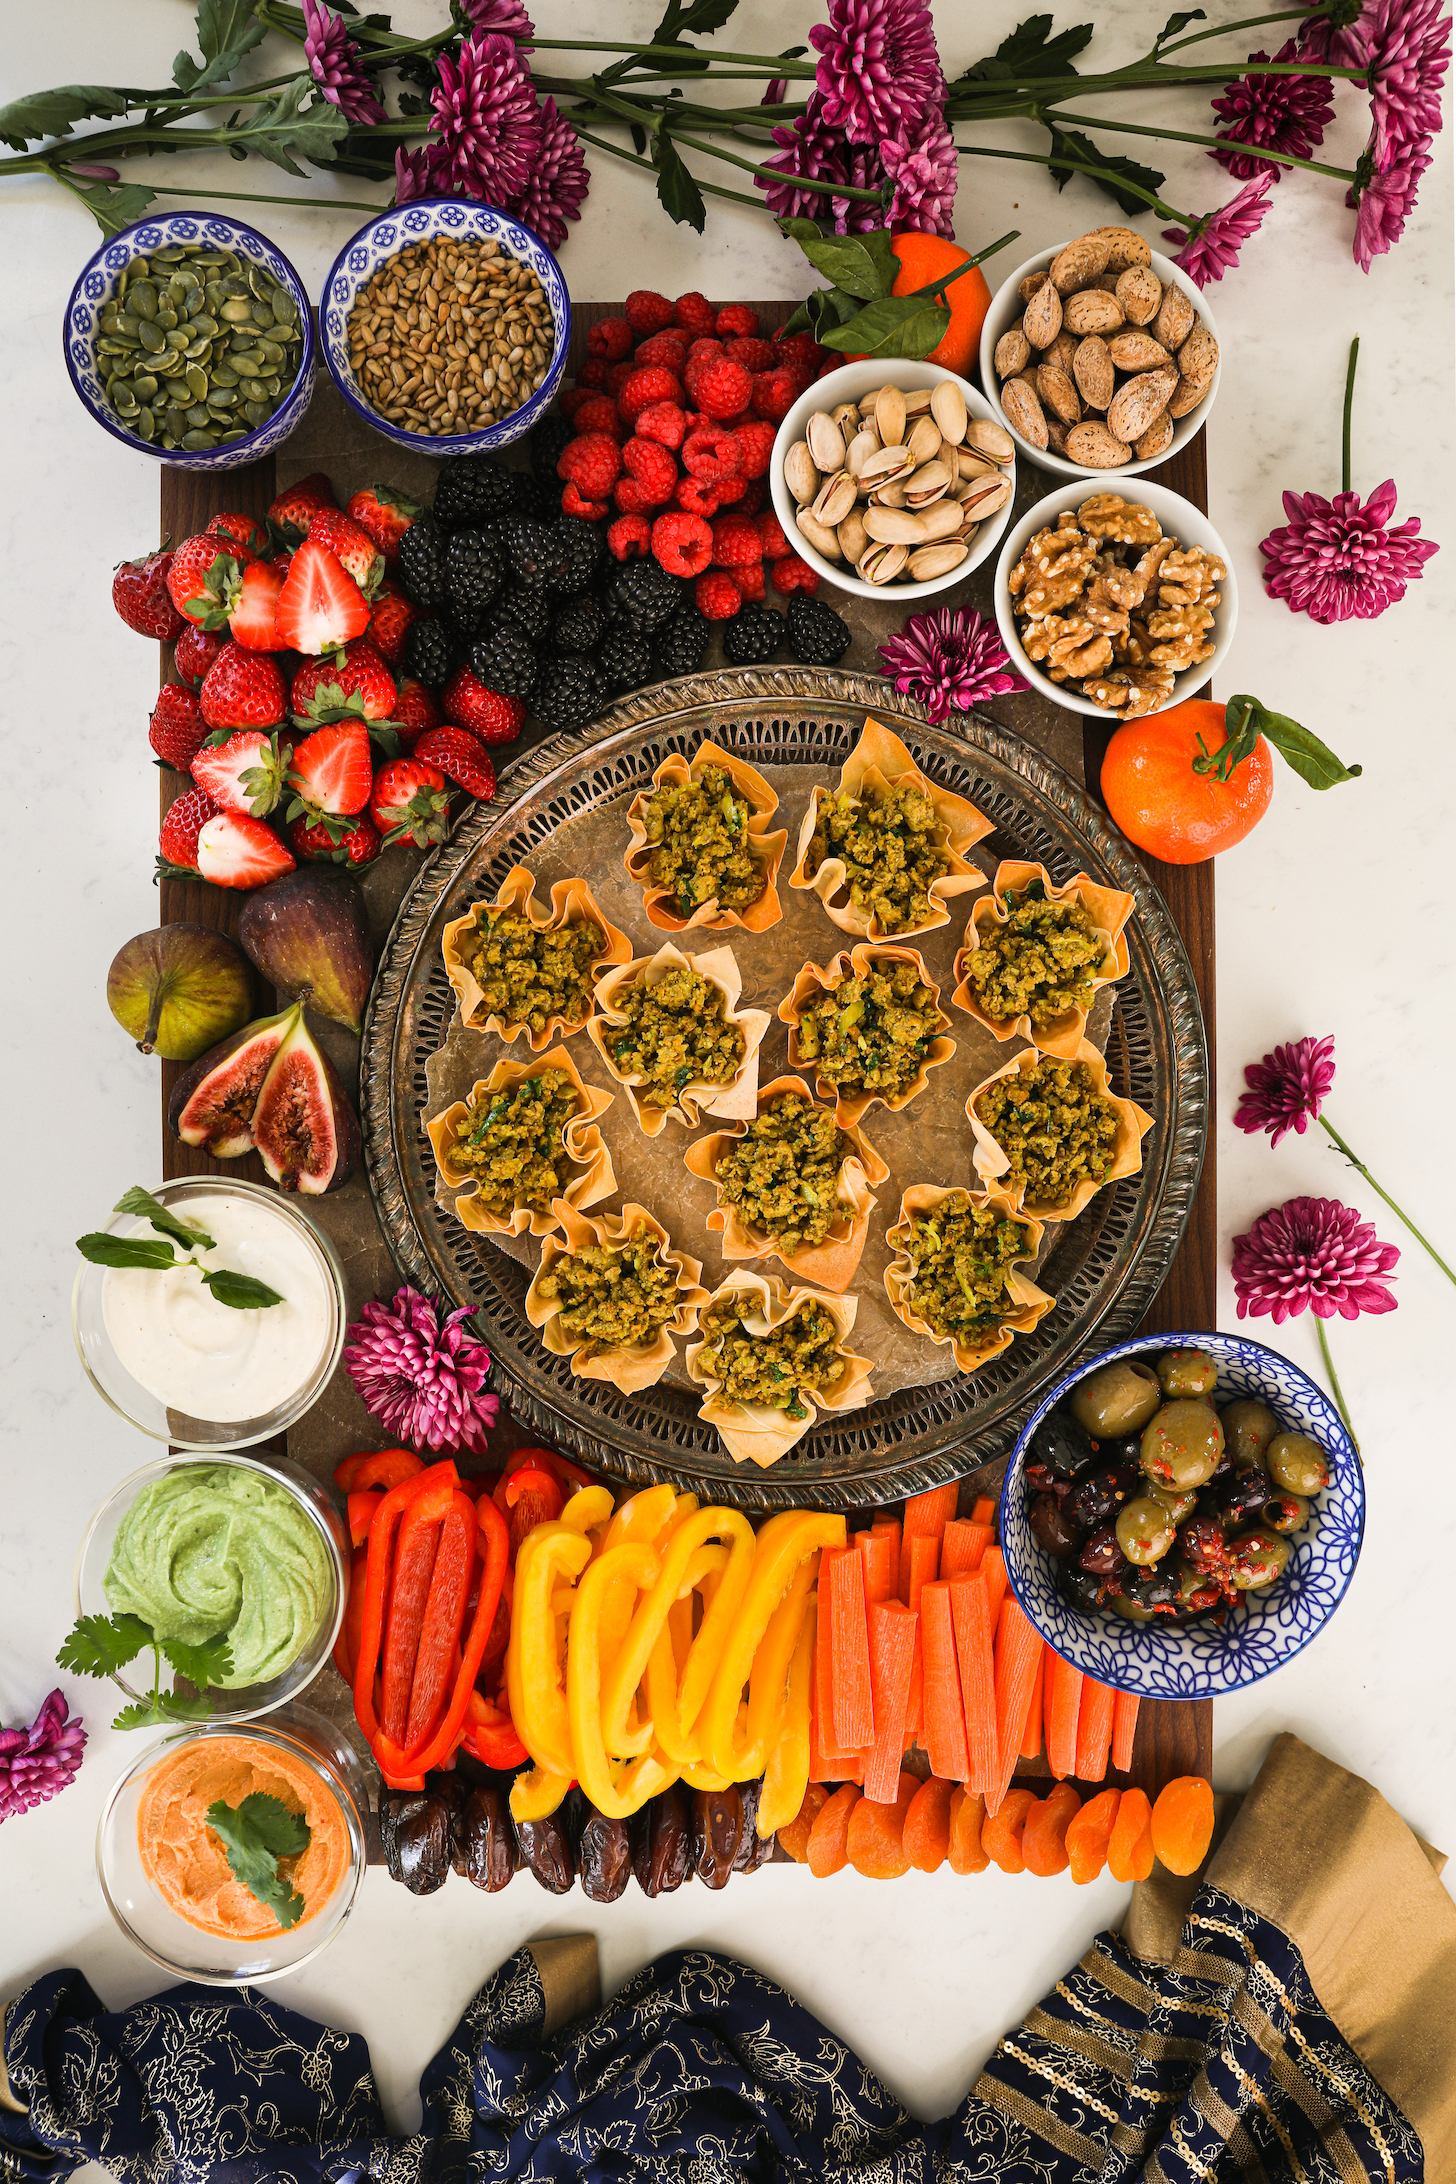 A beautiful and colourful flatlay display of food with a tray of baked pastry shells filled with chicken, fruits, veggies, nuts, olives, seeds and dips. Styled with pink flowers and a traditional scarf.